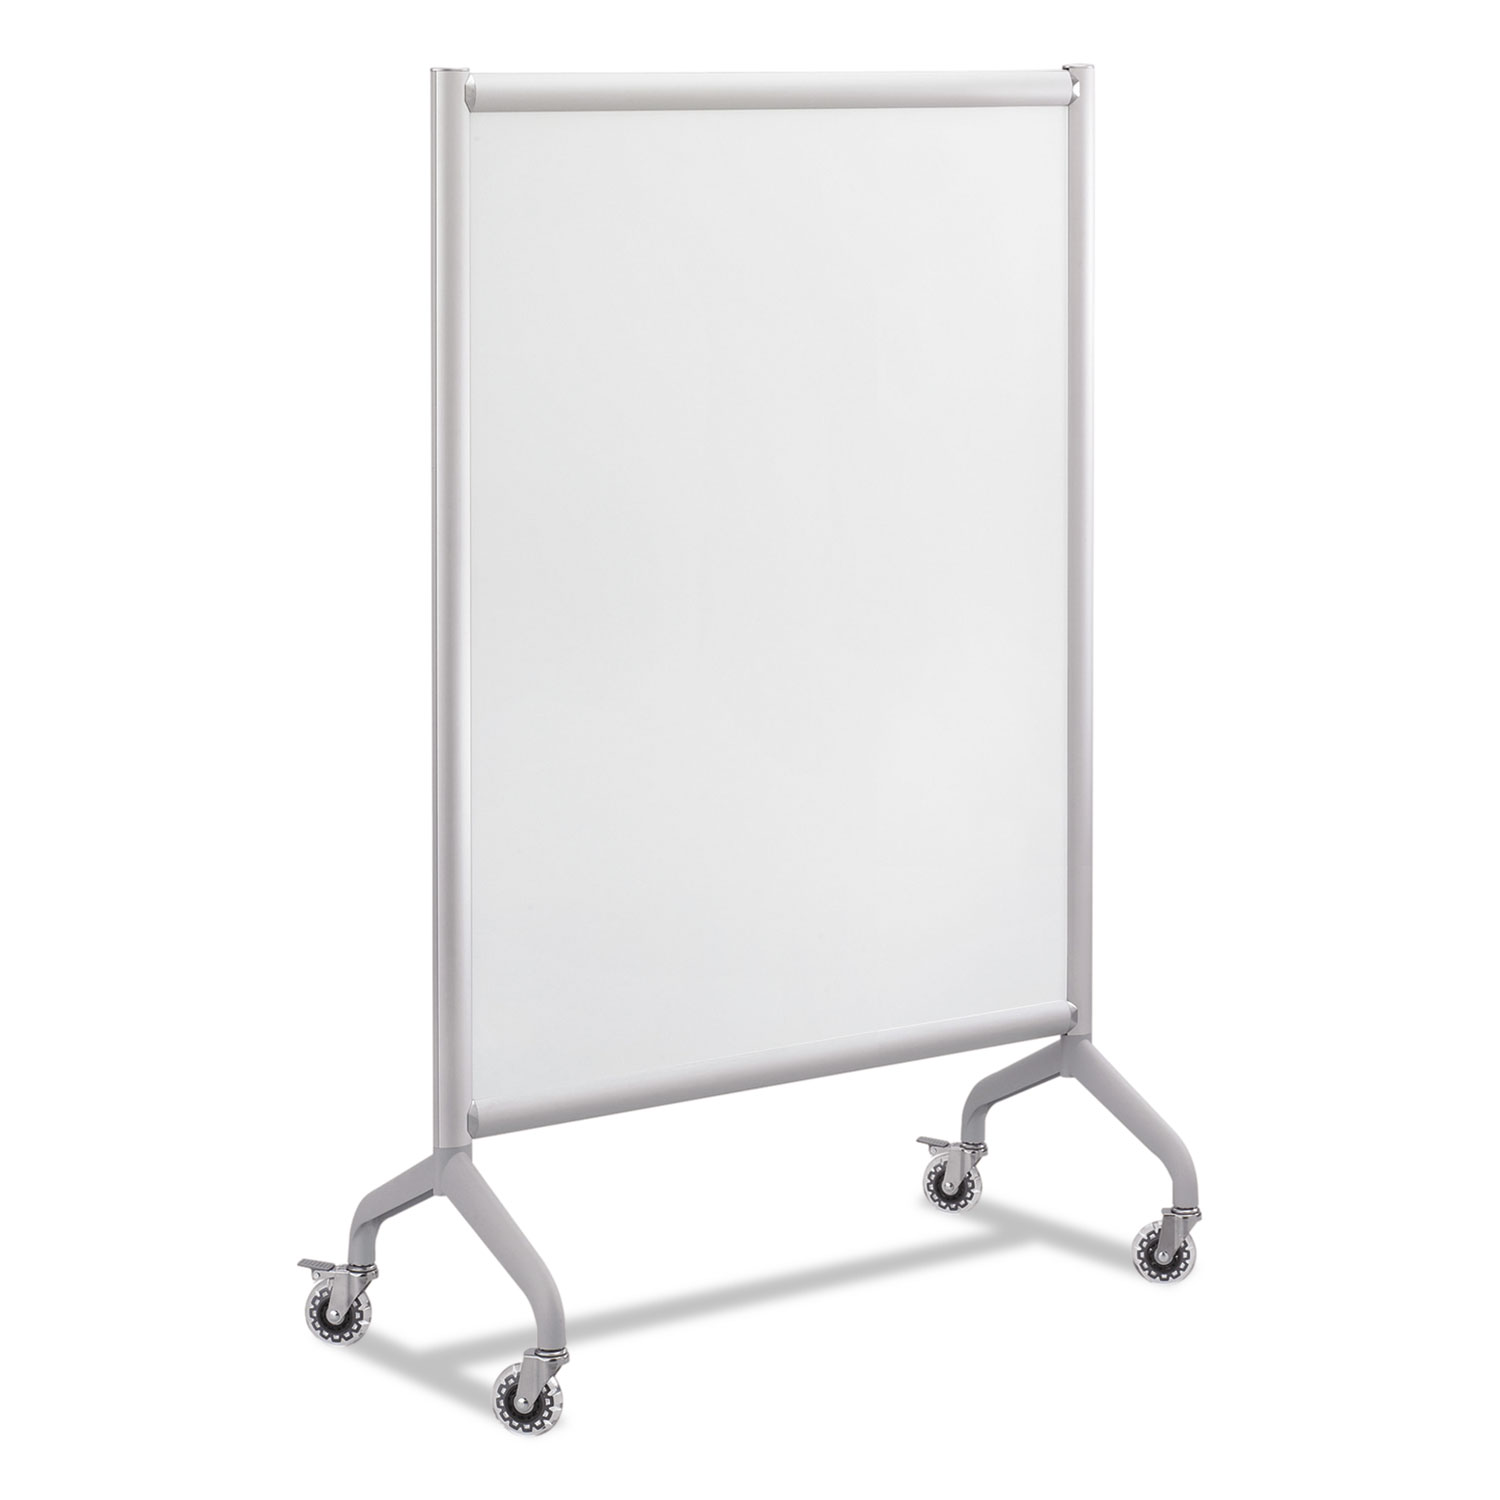  Safco 2014WBS Rumba Full Panel Whiteboard Collaboration Screen, 36w x 16d x 54h, White/Gray (SAF2014WBS) 